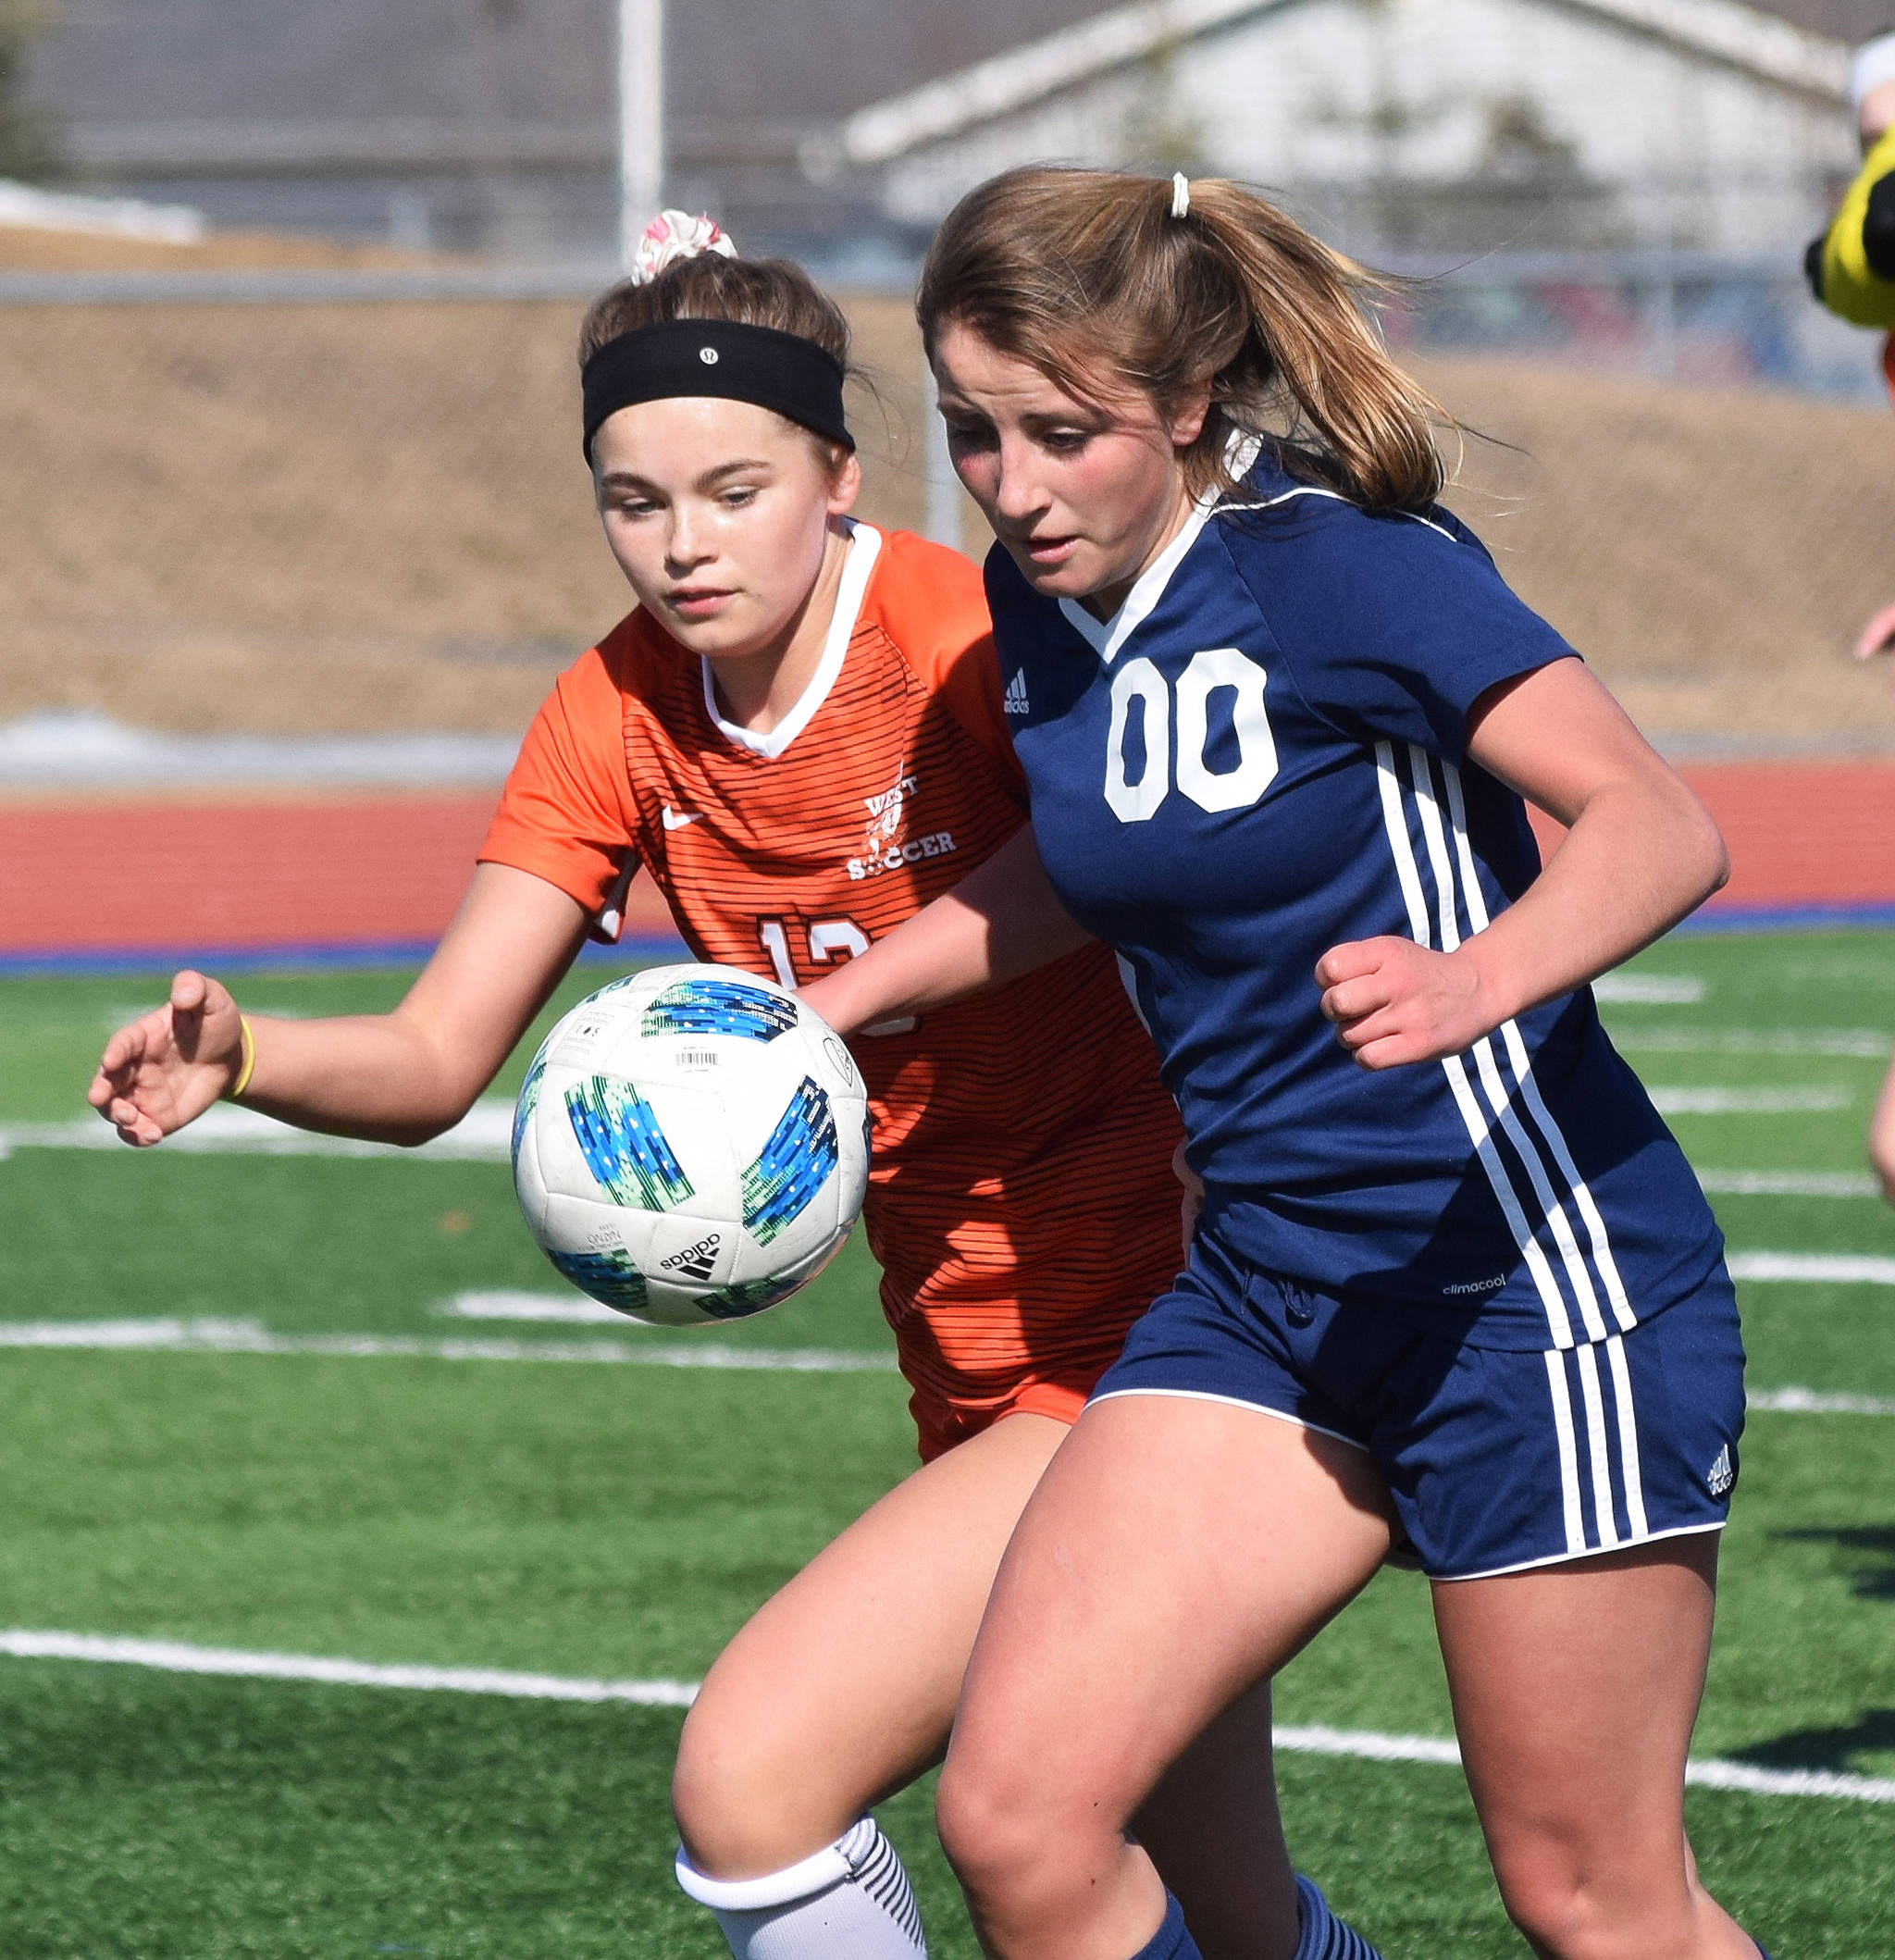 Soldotna’s Ryann Cannava (00) battles for the ball with West’s Skyler Helgeson Friday, April 5, 2019, in a nonconference contest at Soldotna High School. (Photo by Joey Klecka/Peninsula Clarion)